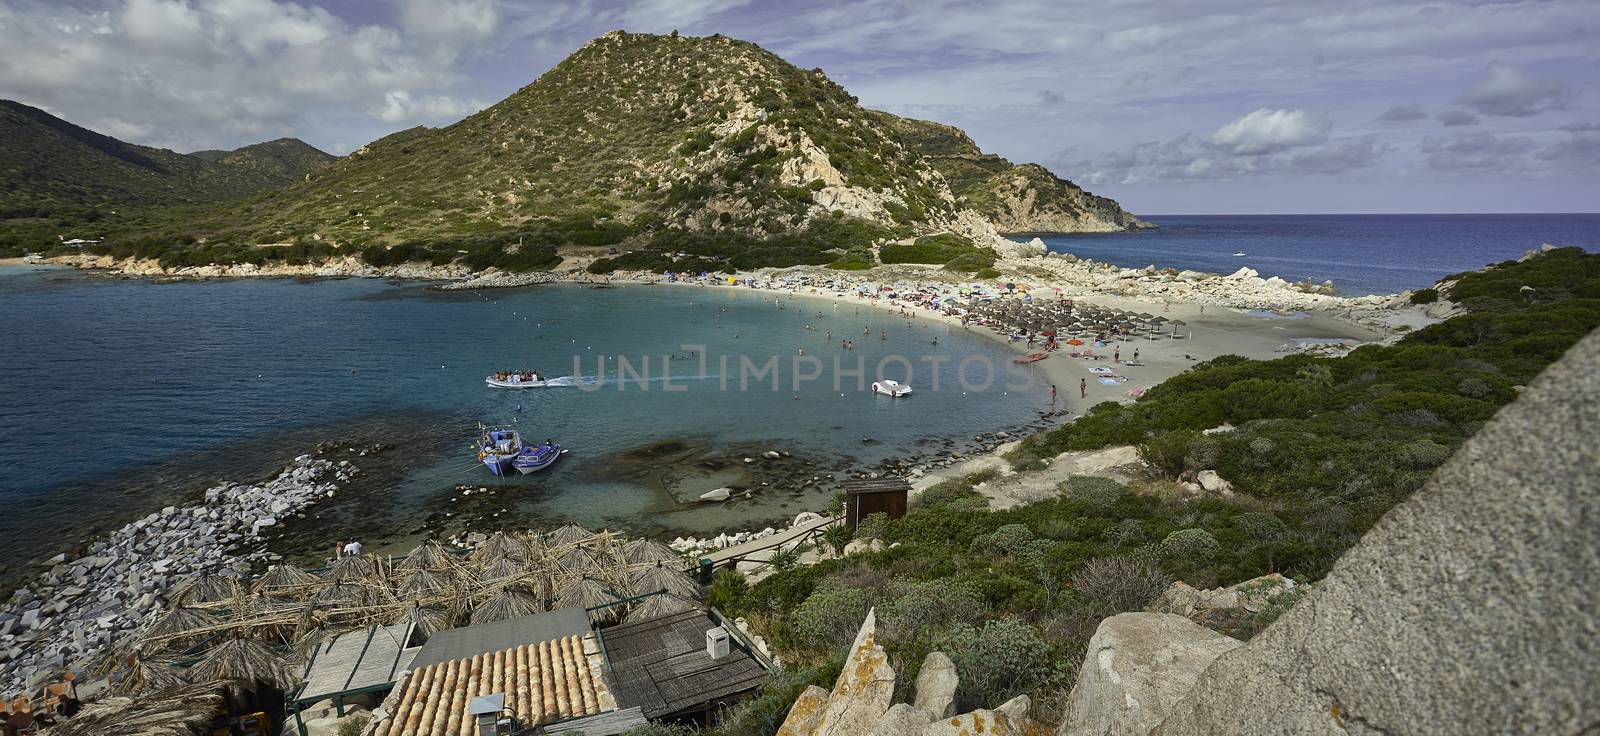 Overview of Punta Molentis beach. by pippocarlot